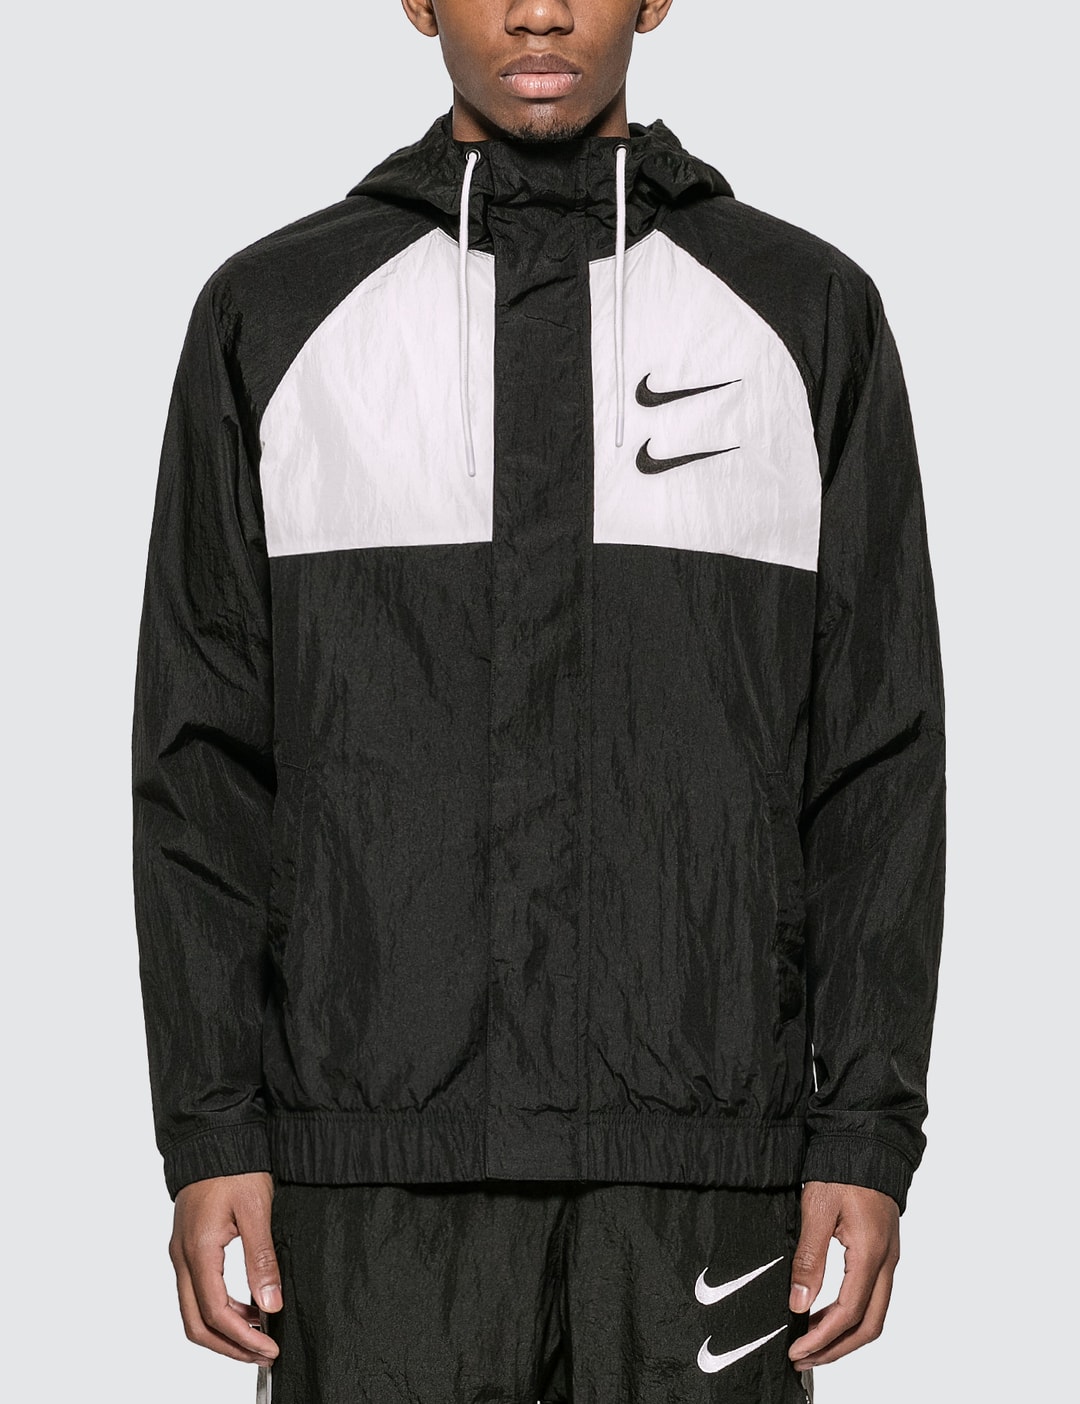 Pence Ojalá cerca Nike - Nike Sportswear Swoosh Woven Jacket | HBX - Globally Curated Fashion  and Lifestyle by Hypebeast